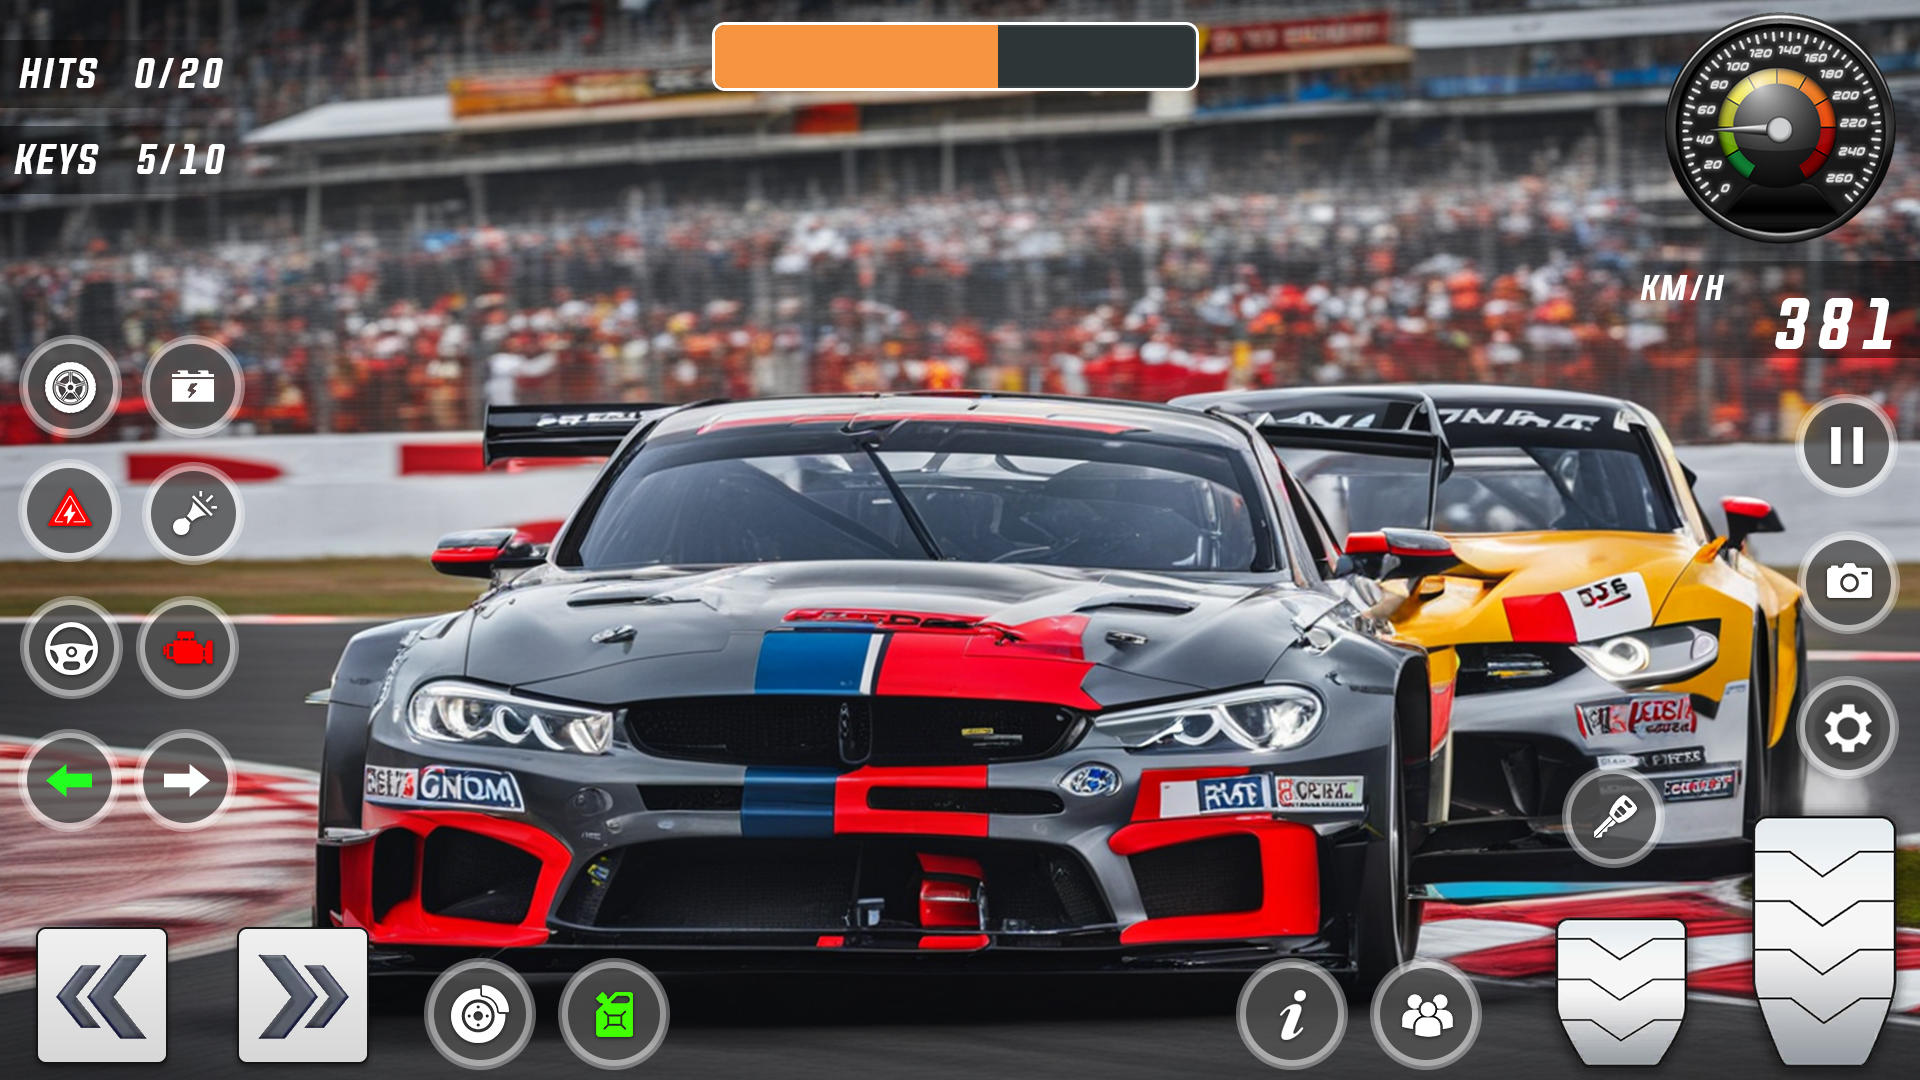 Fast X Racing - Tap Drift - Apps on Google Play